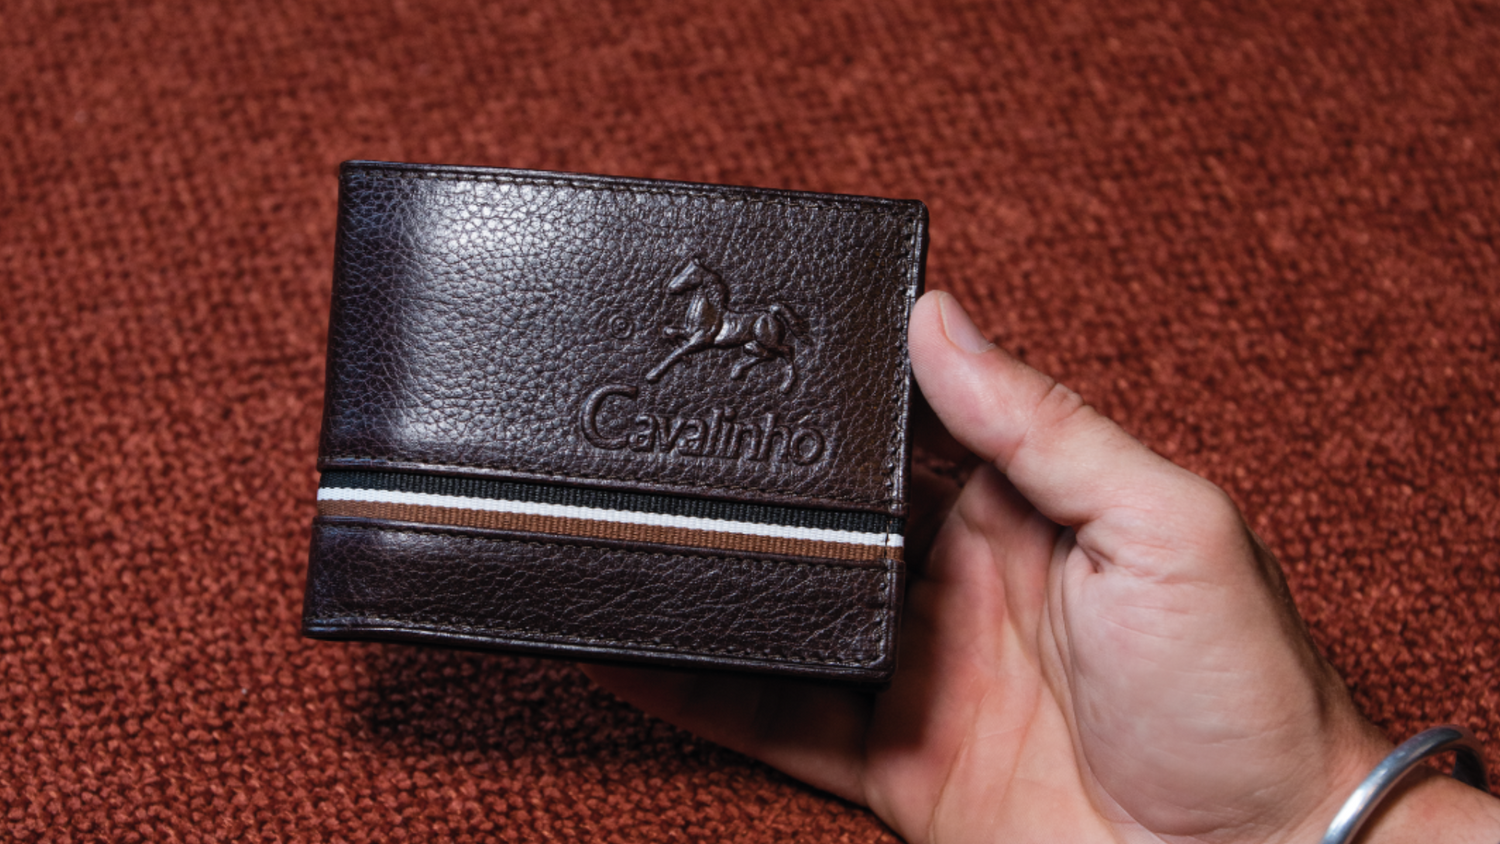 Men's Wallets and Accessories